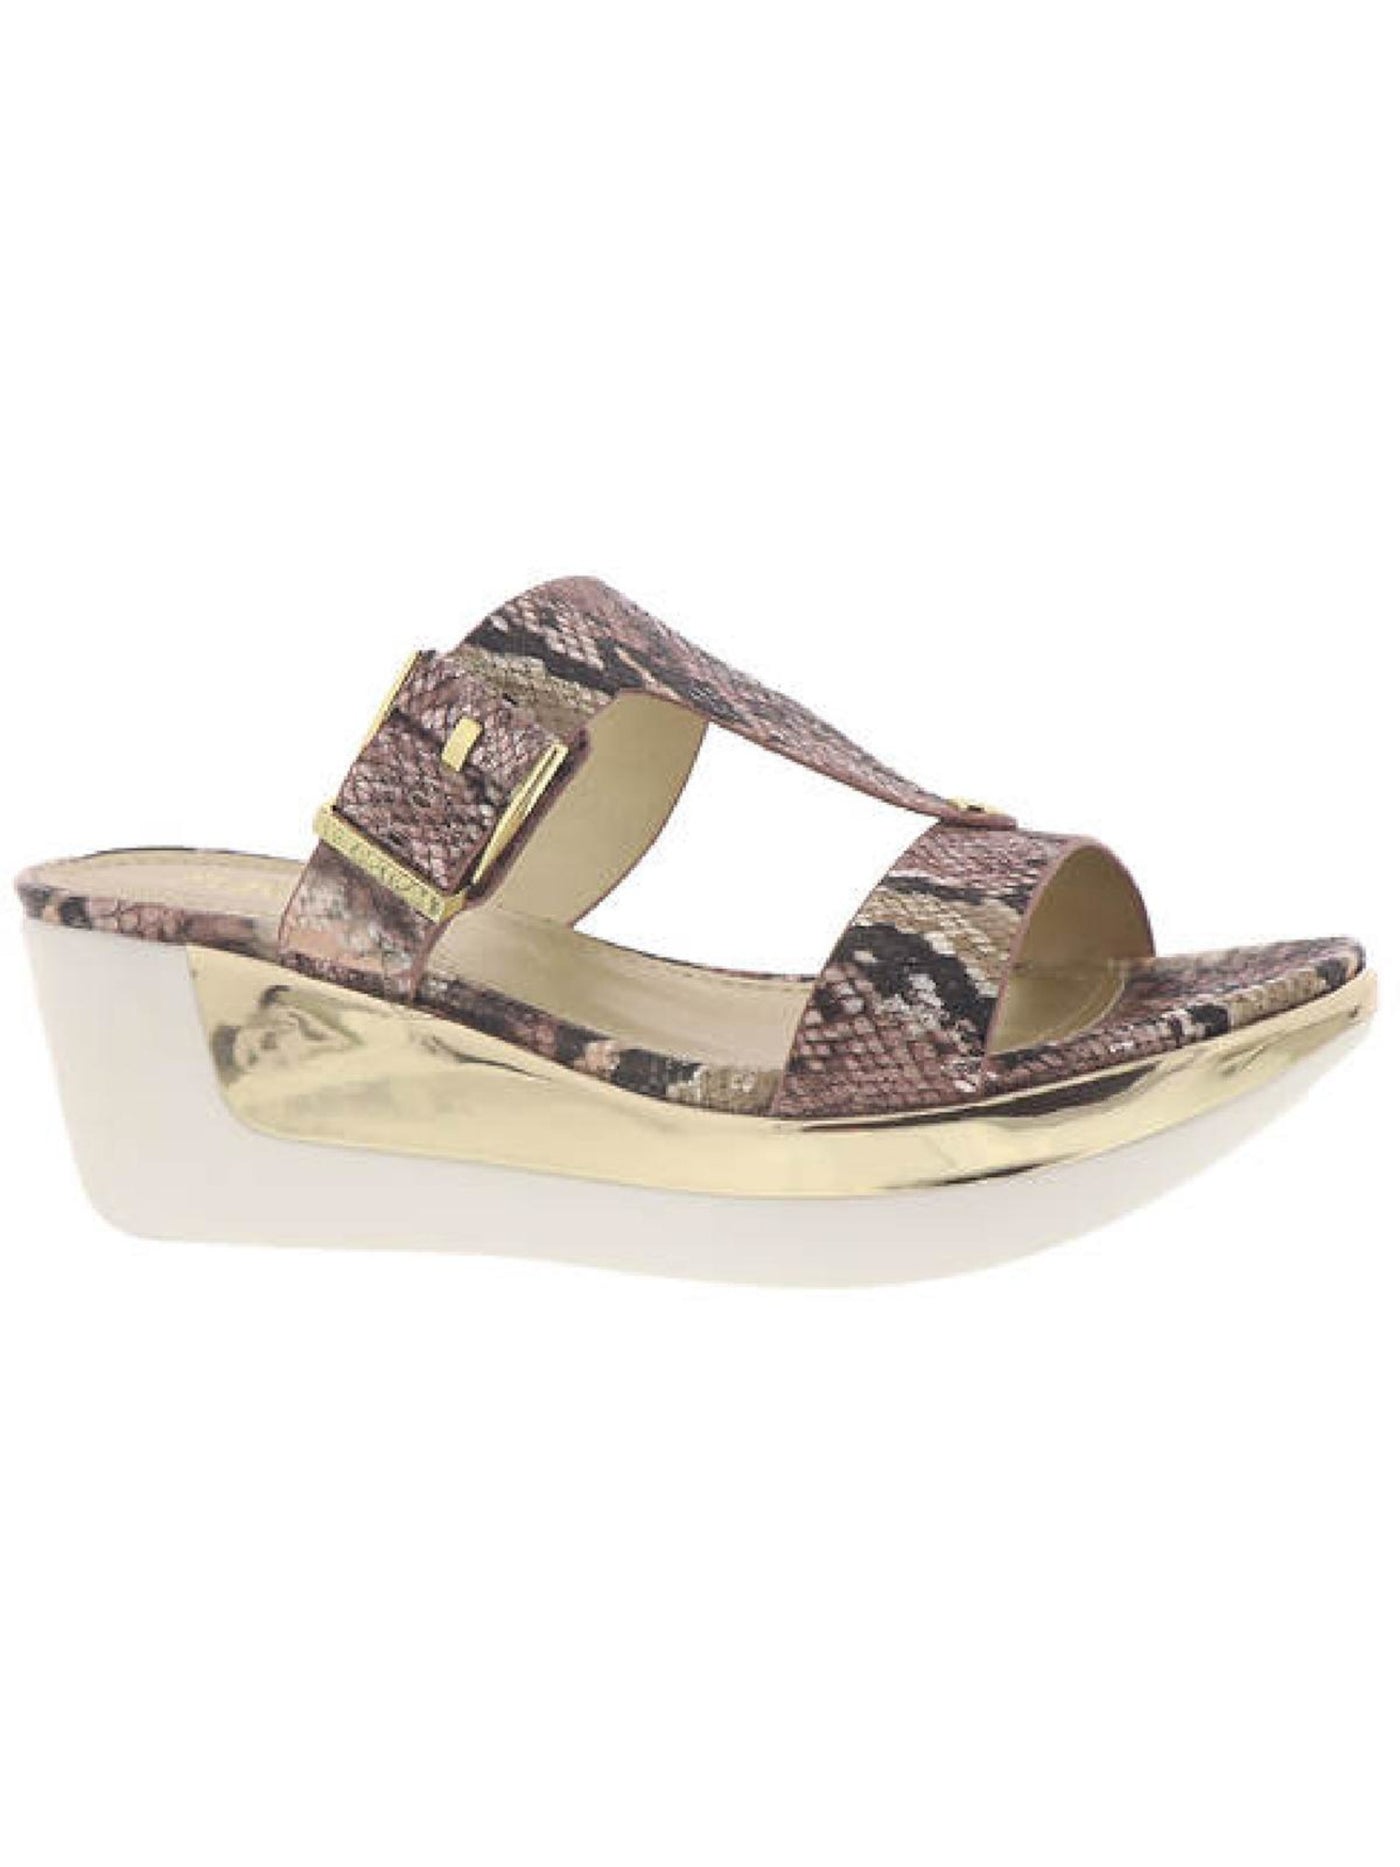 REACTION KENNETH COLE Womens Beige Snake Print Buckle Accent T-Strap Comfort Pepea Buckle Round Toe Wedge Slip On Sandals 9 M